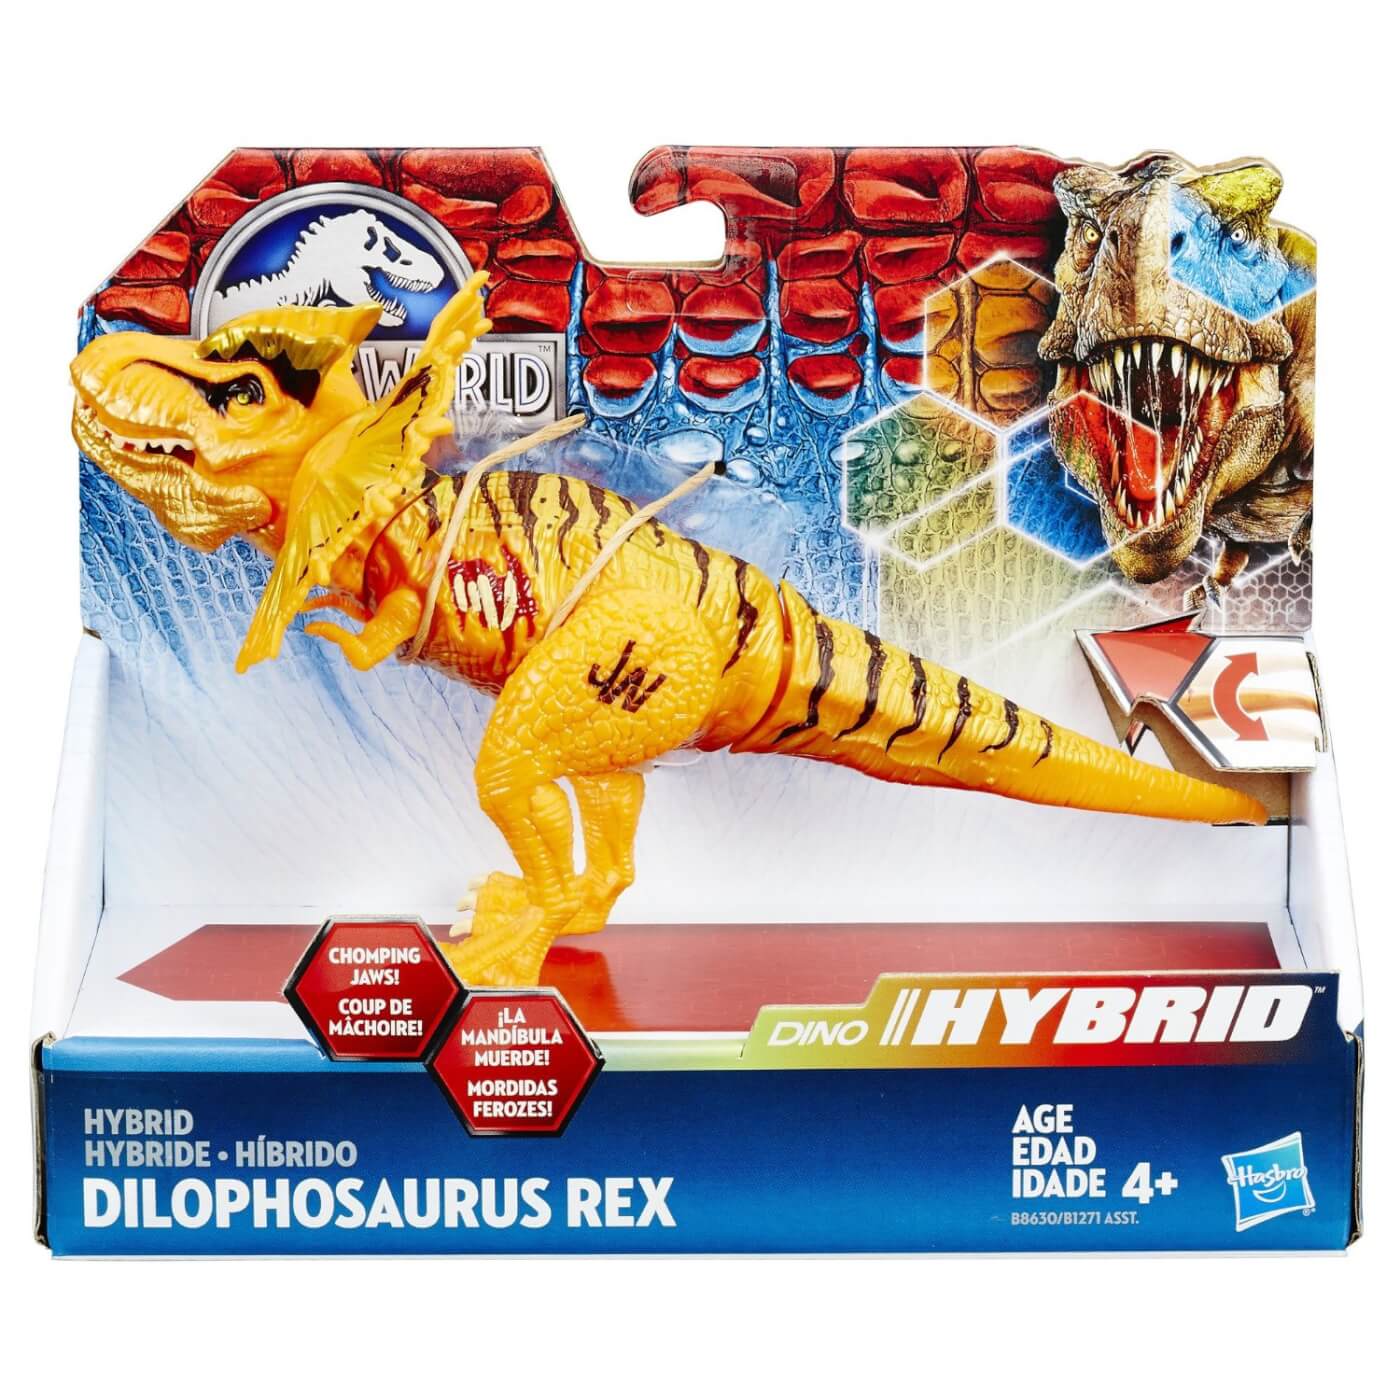 New Jurassic World ‘dino Hybrid Toys Could These Be Hasbros Finale Jurassic Outpost 